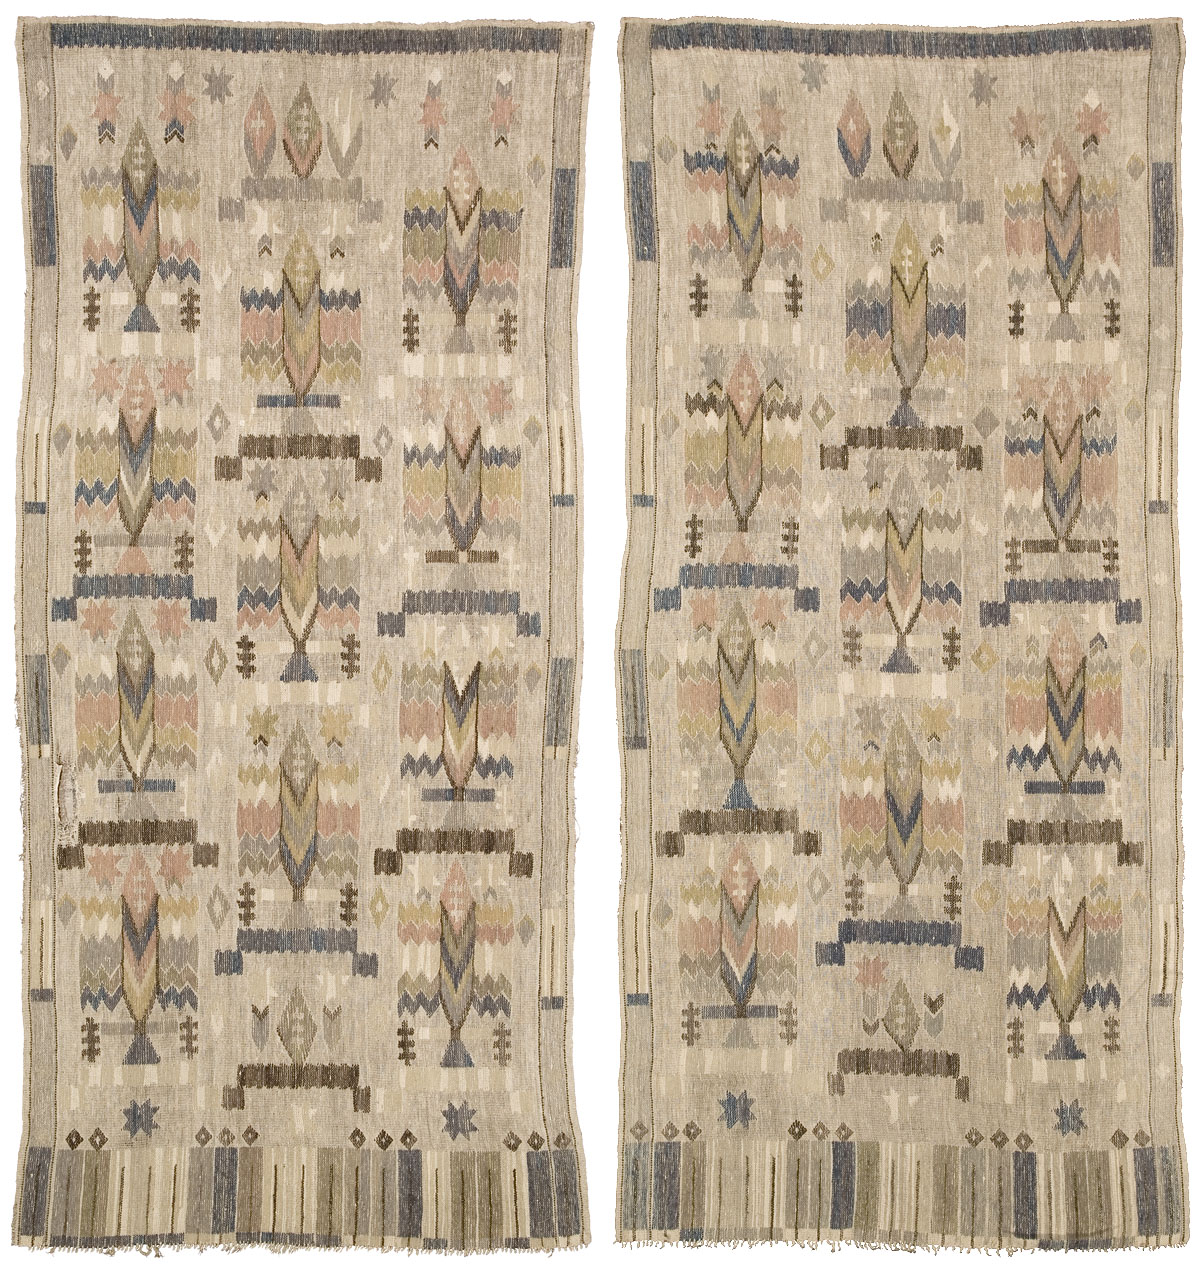 Swedish Vintage Wall Hanging by Annie Frykholm | FJ Hakimian | Carpet Gallery in NYC